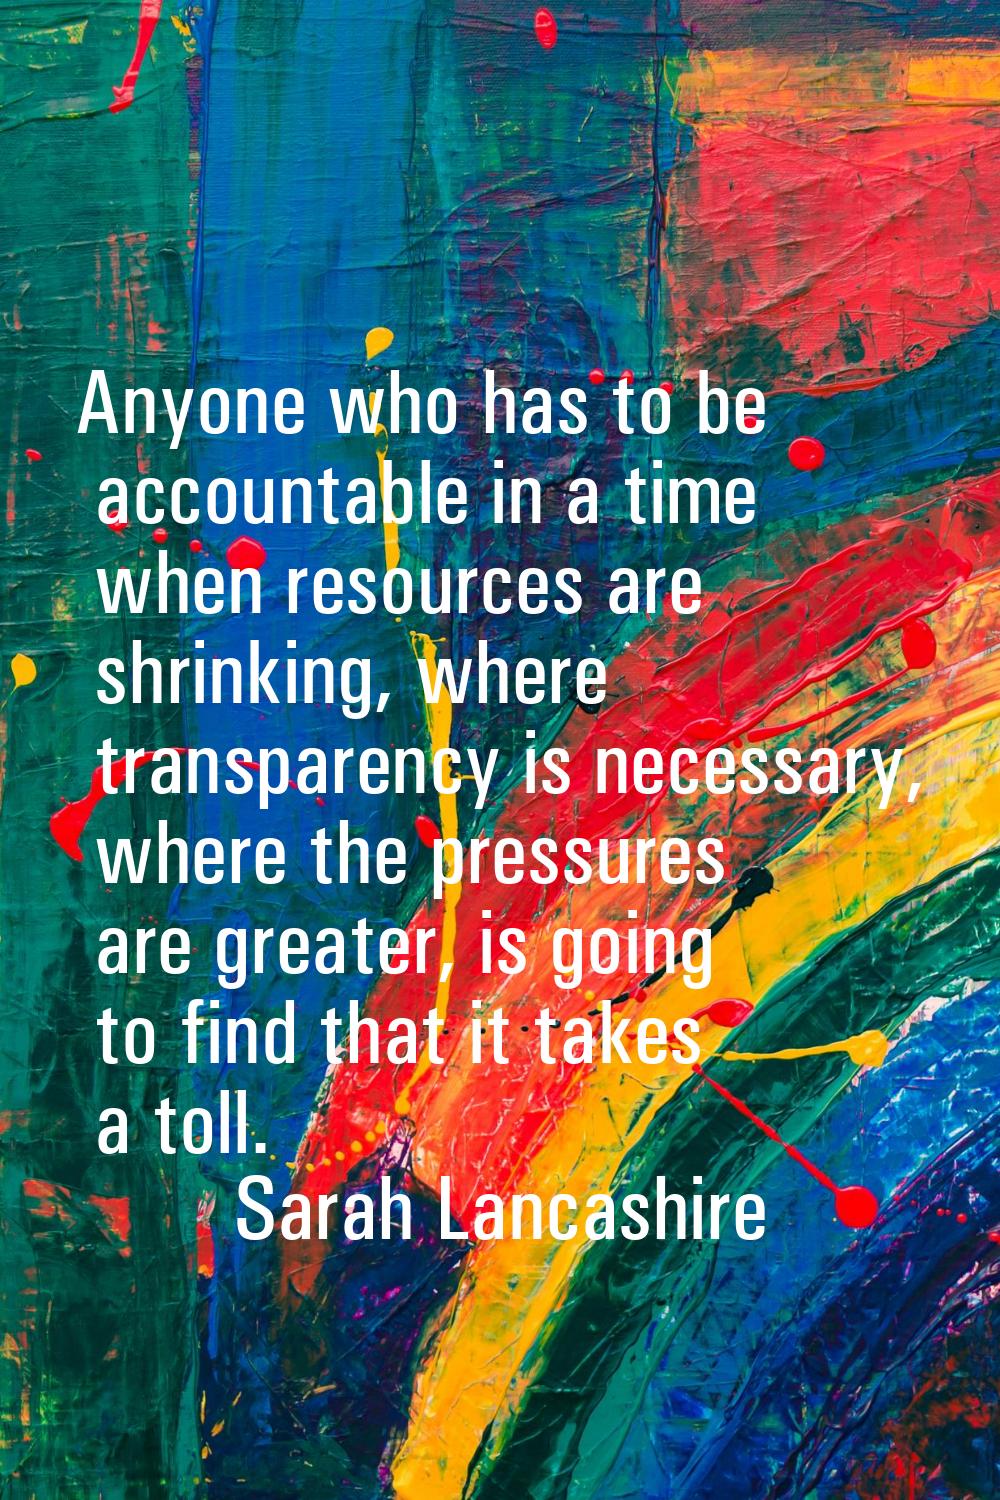 Anyone who has to be accountable in a time when resources are shrinking, where transparency is nece